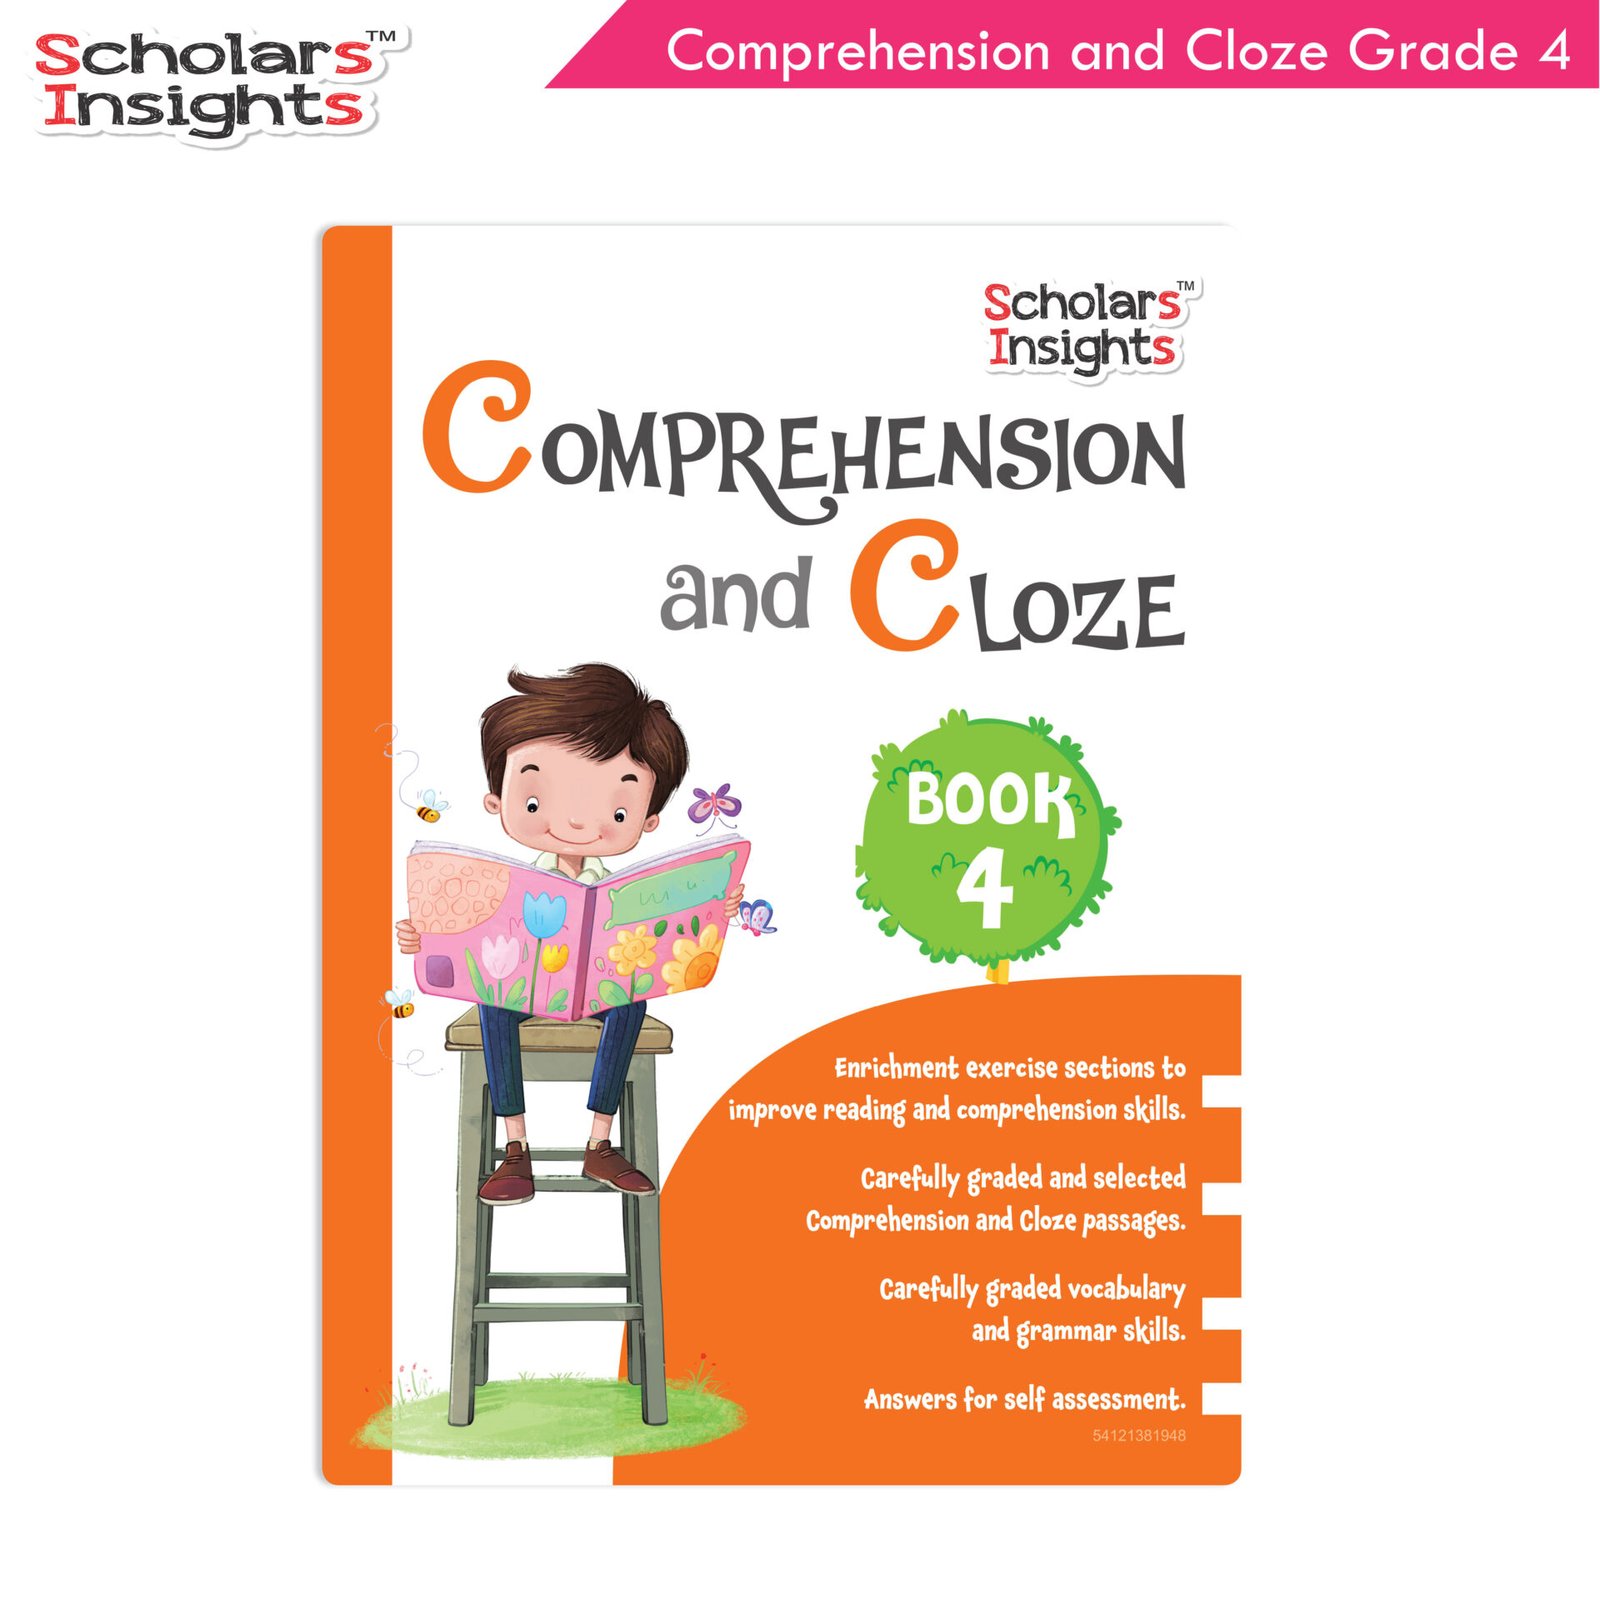 Scholars Insights Comprehension and Cloze Grade 4 1 1